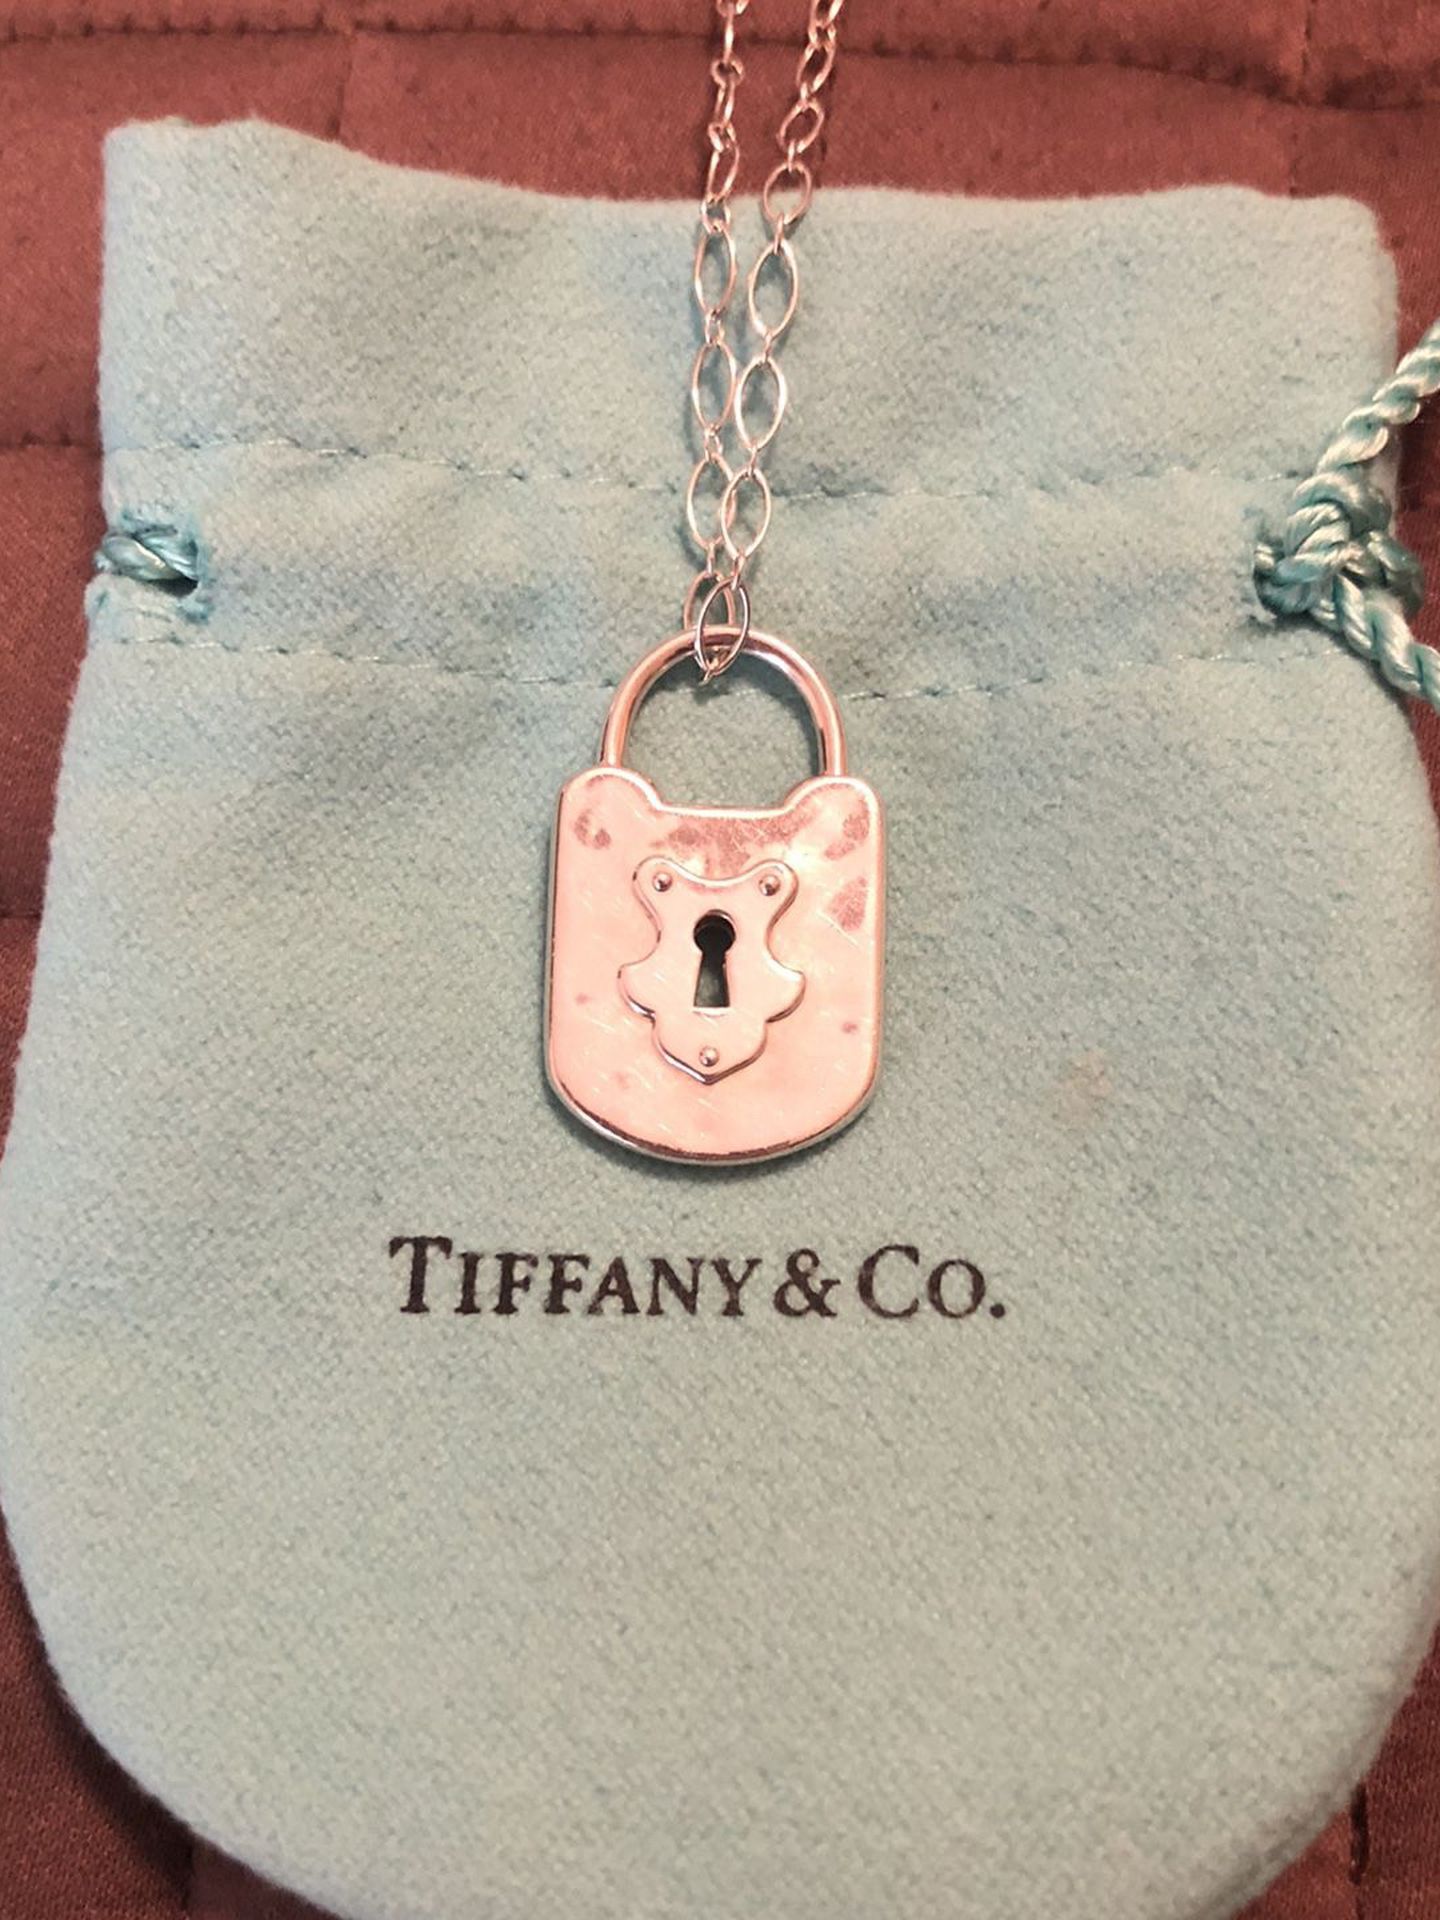 Tiffany & Co. Lock Pendant And 20” Oval Link Chain